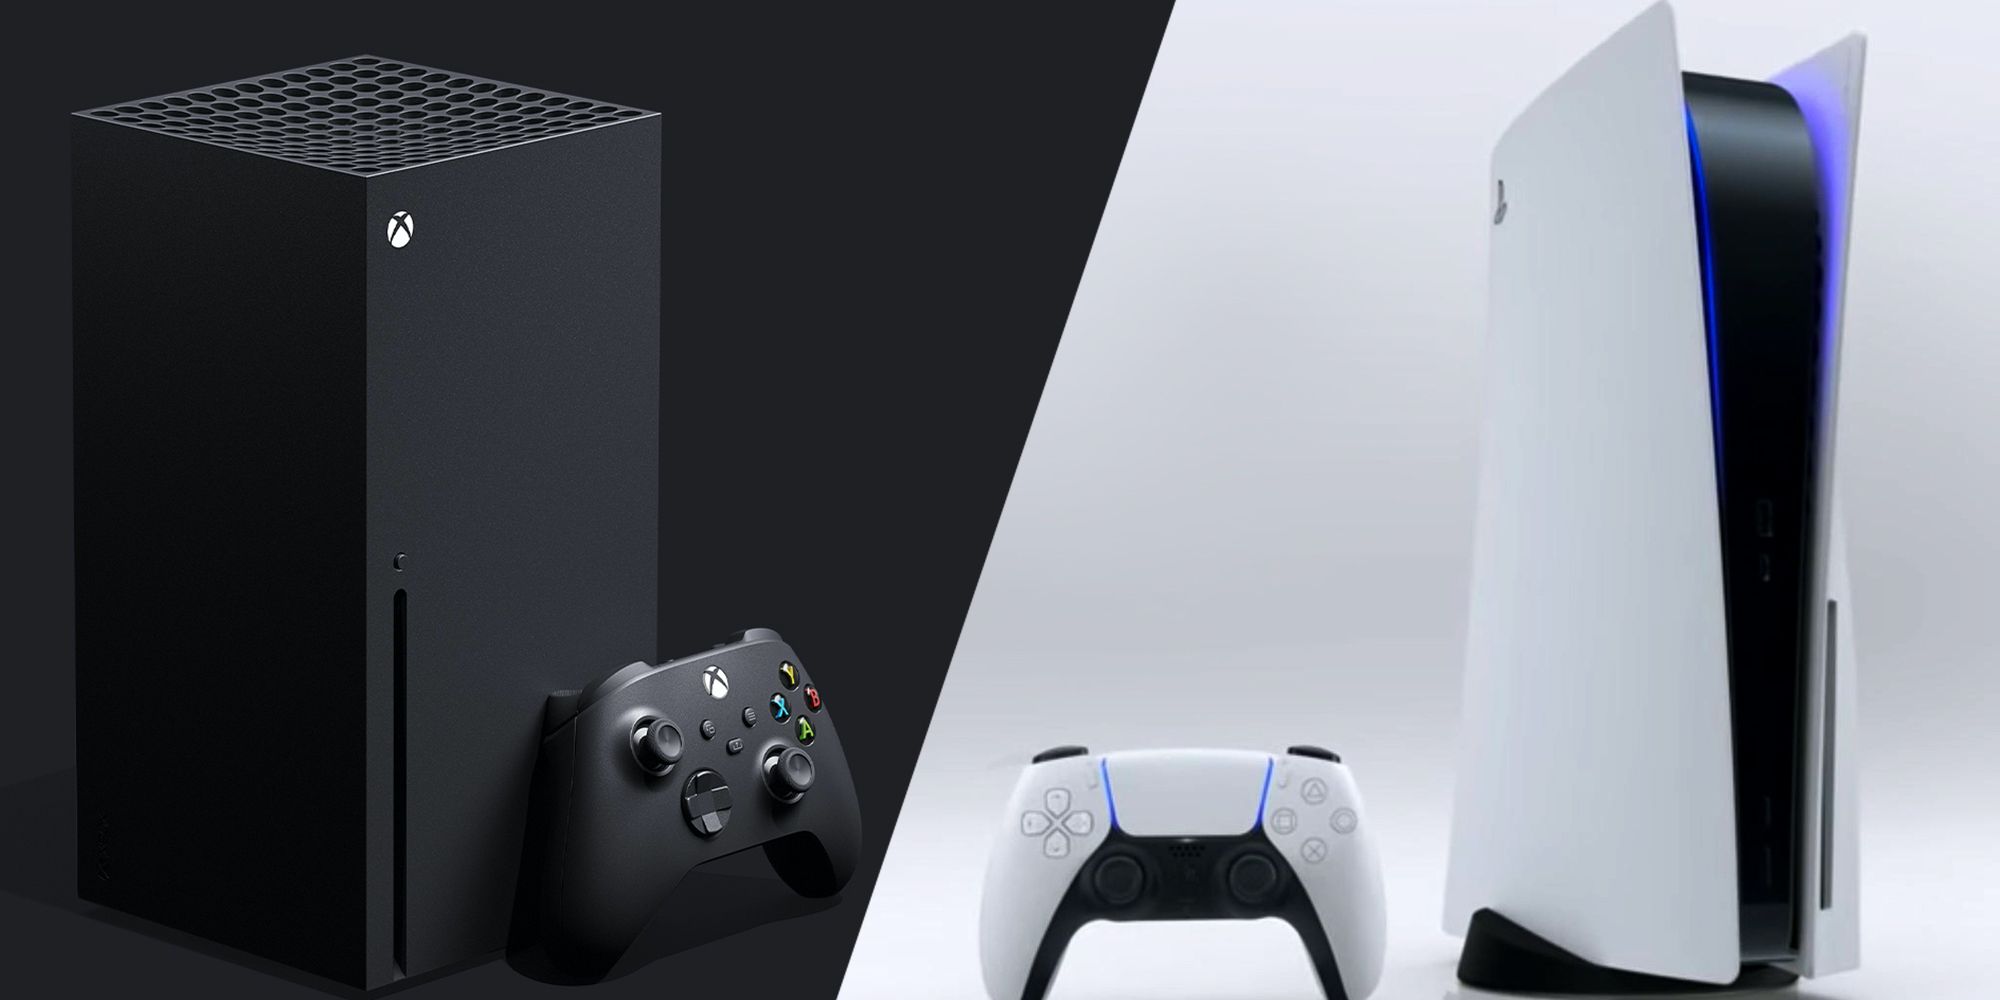 Xbox Series X and PS5 consoles.